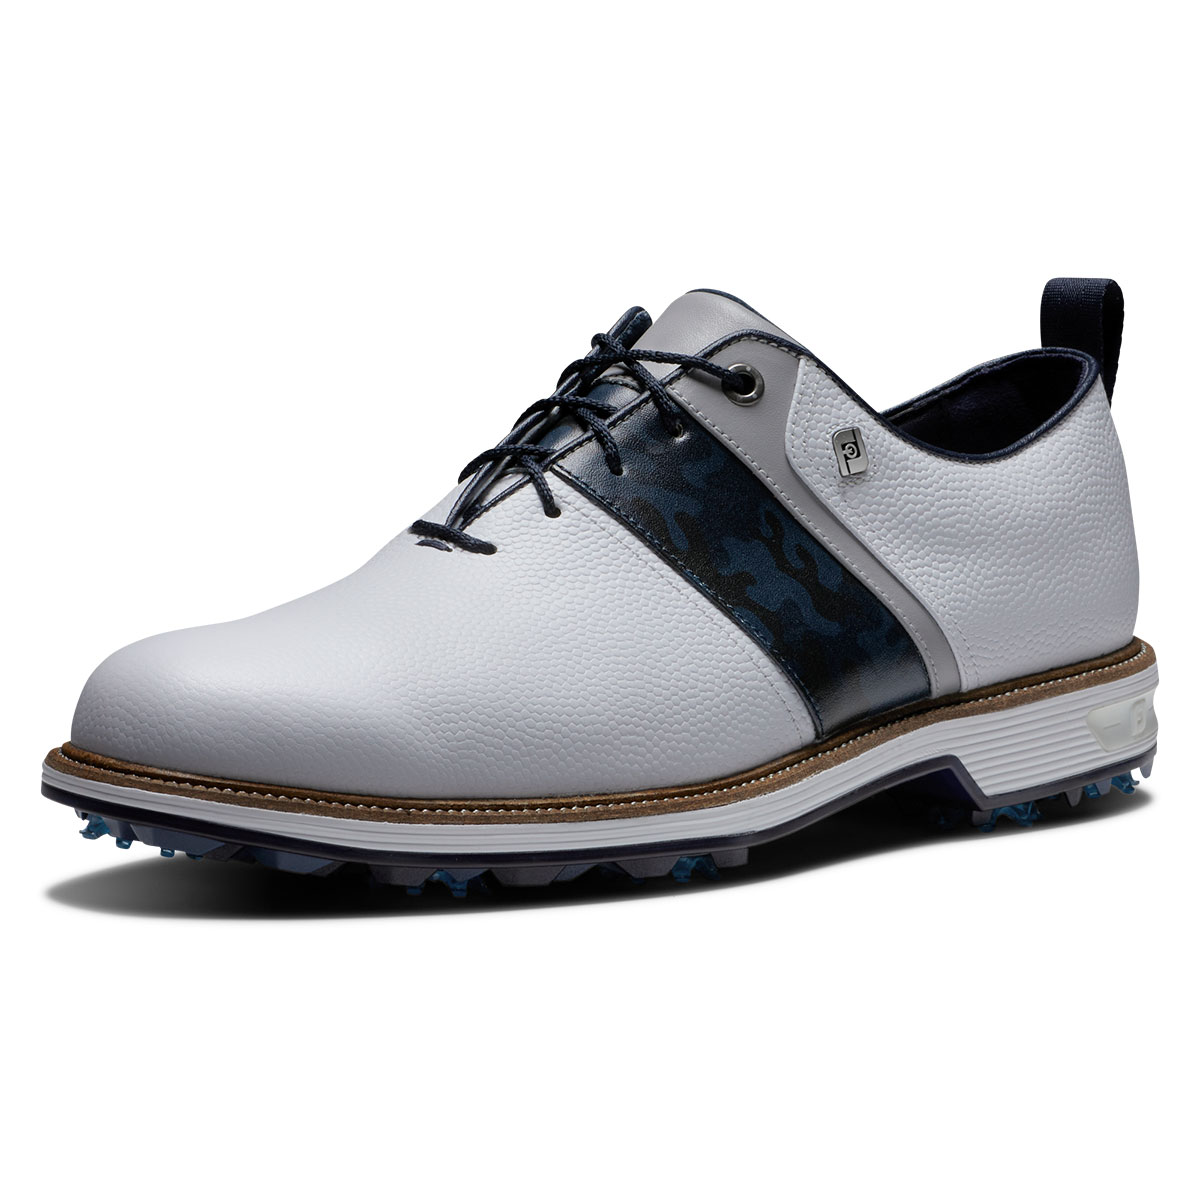 FootJoy Men's Todd Snyder Packard Waterproof Spiked Golf Shoes from ...